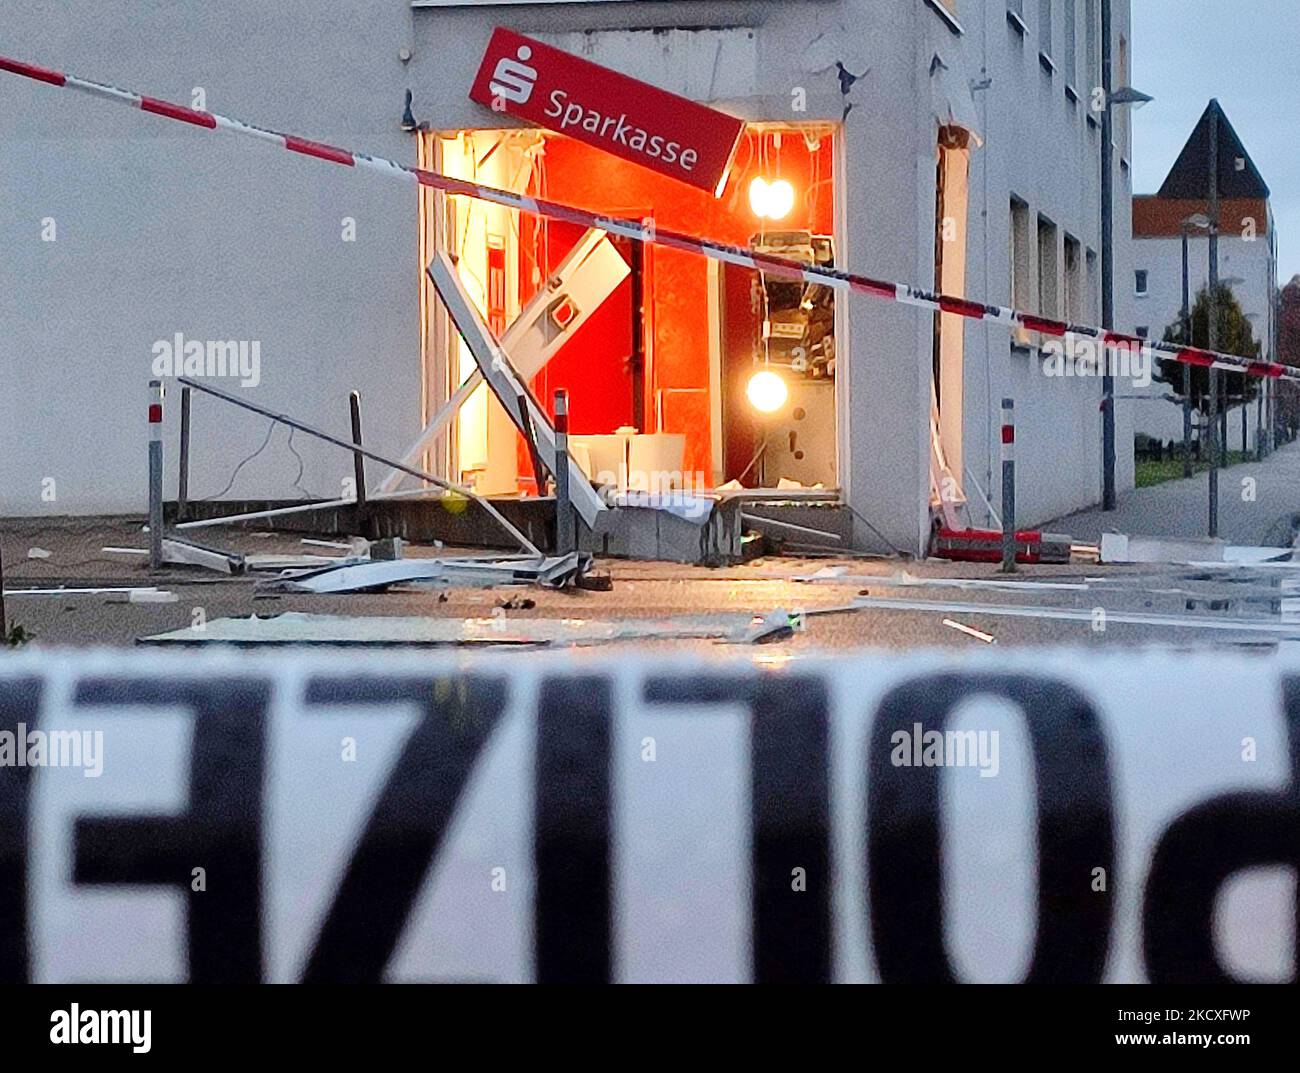 Karlsruhe, Germany. 05th Nov, 2022. Unknown persons have blown up an ATM at a retirement home in Karlsruhe and damaged parts of the building in the process. For safety reasons, residents had to leave their accommodation briefly on Saturday night, according to police reports, but were then able to return. Credit: Thomas Riedel/Stutenseeredaktion/dpa/Alamy Live News Stock Photo